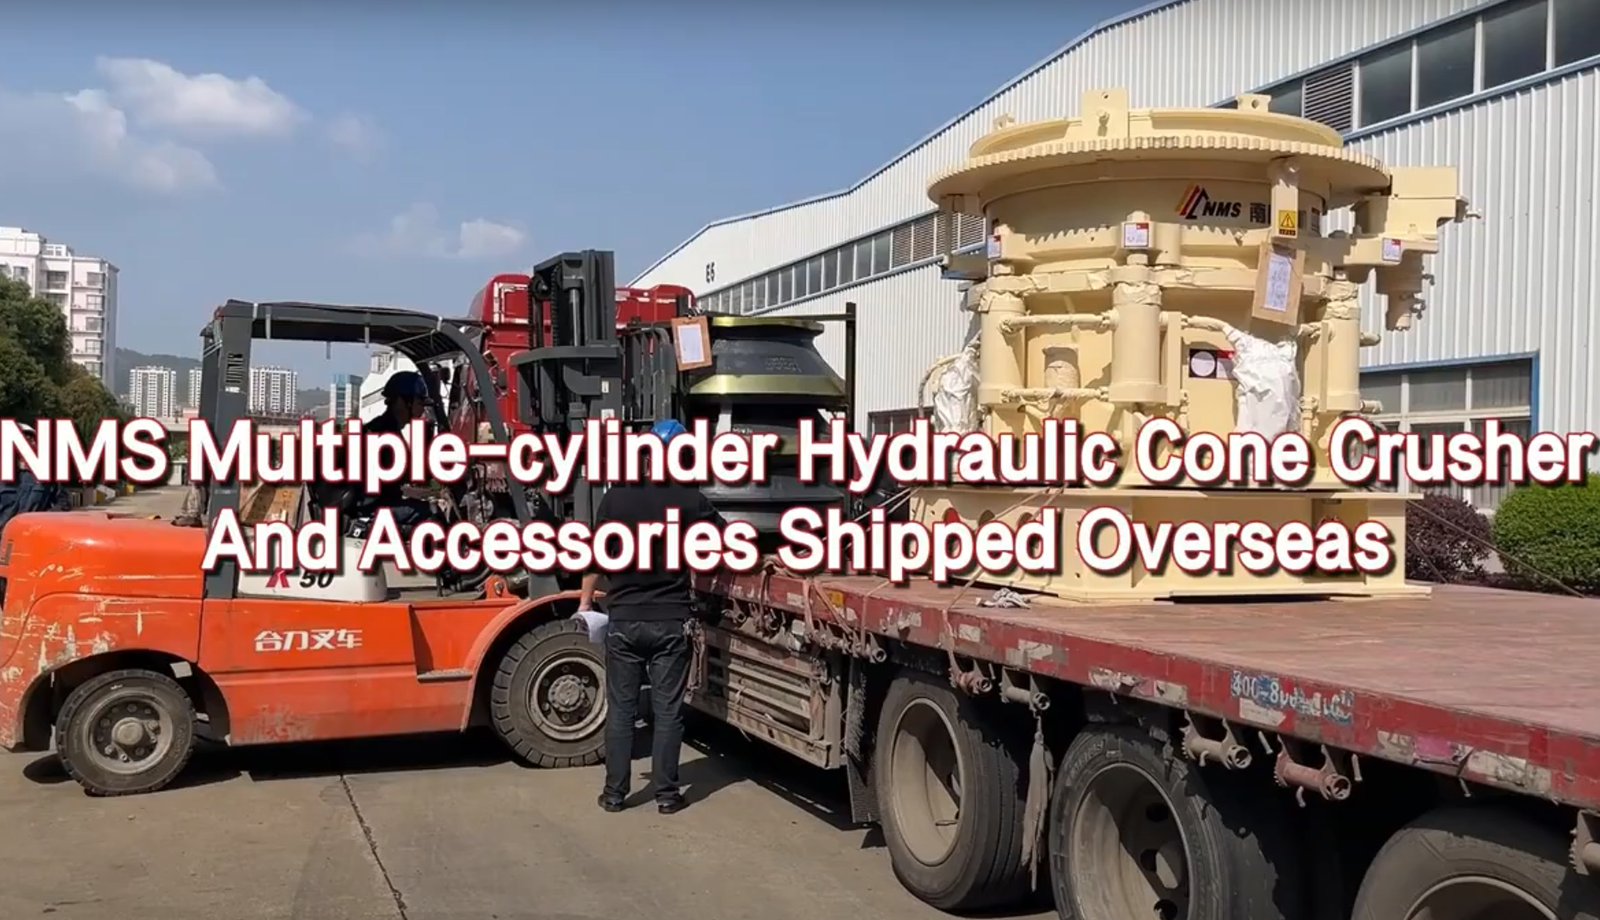 NMS Multiple-cylinder Hydraulic Cone Crusher and Accessories Shipped Overseas